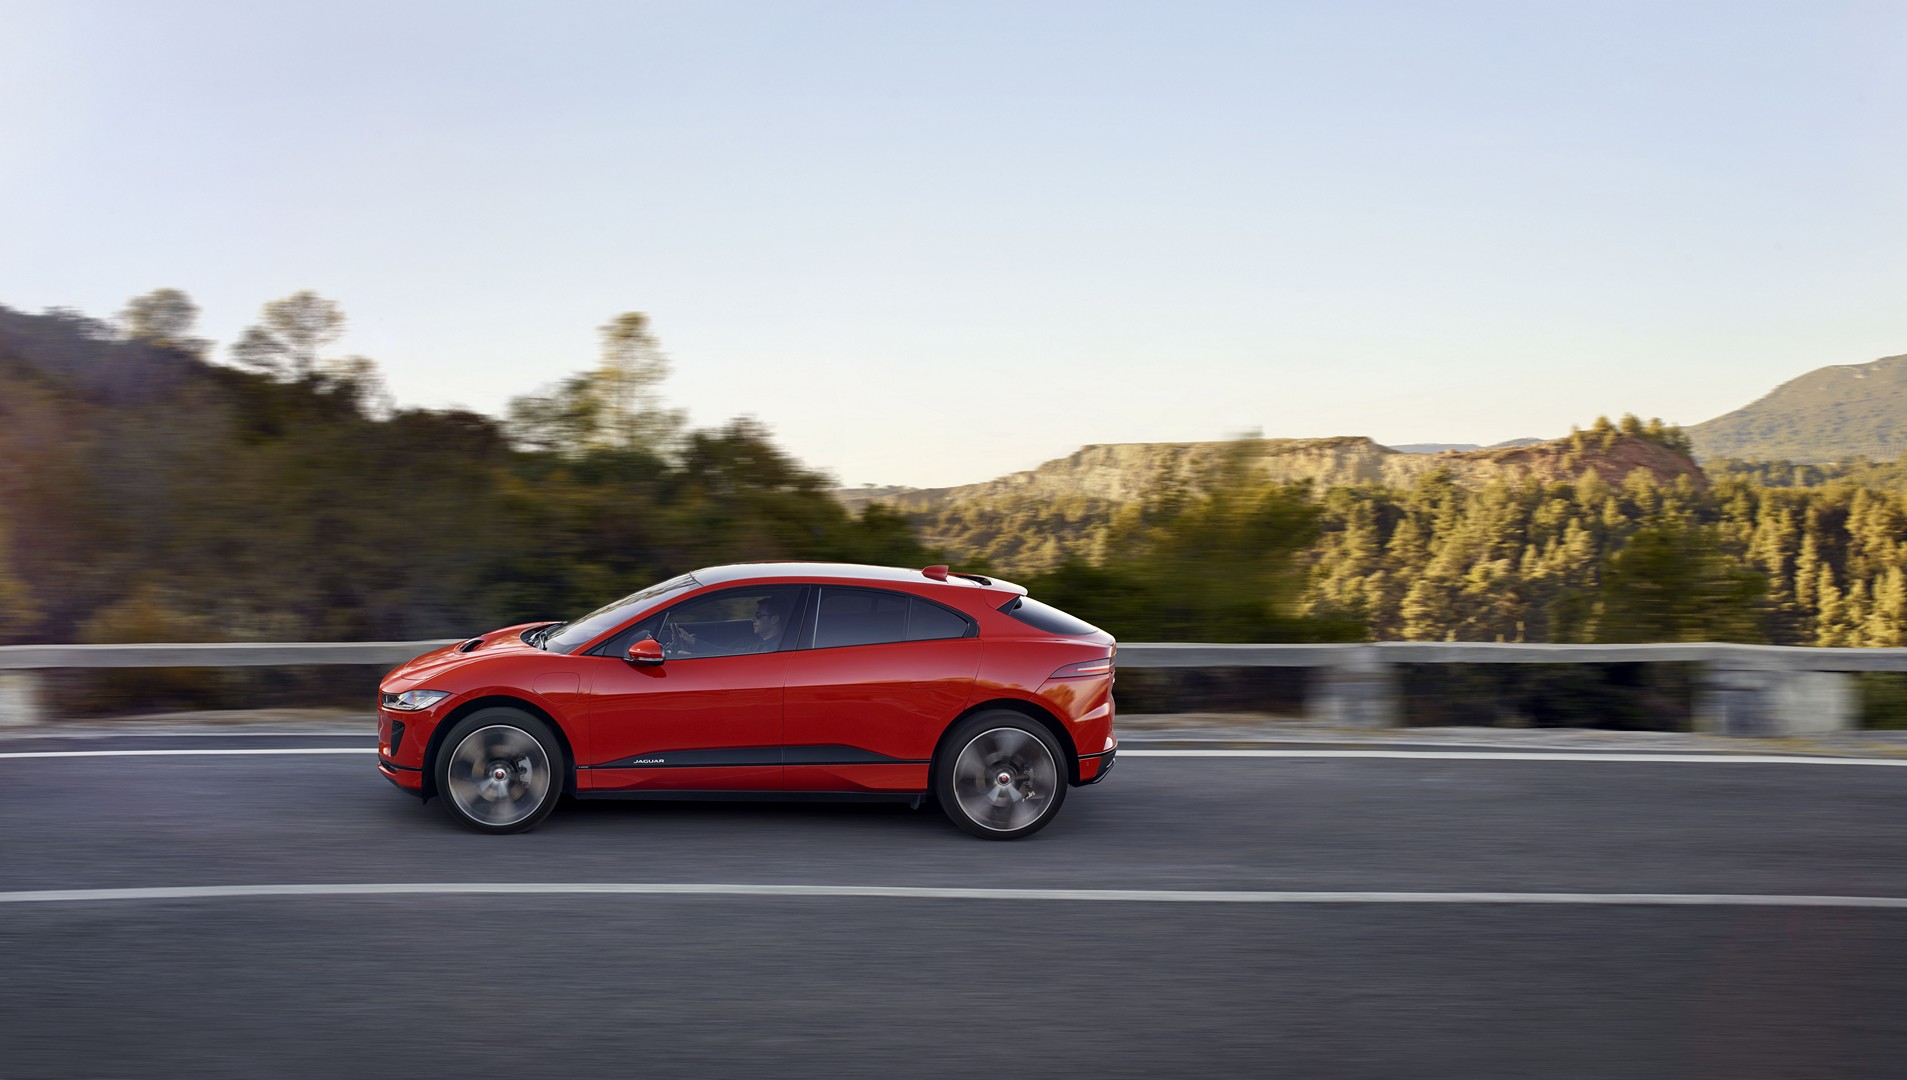 https://s1.cdn.autoevolution.com/images/news/gallery/2020-jaguar-i-pace-update-offers-234-miles-of-range-thanks-to-etrophy-know-how_54.jpg